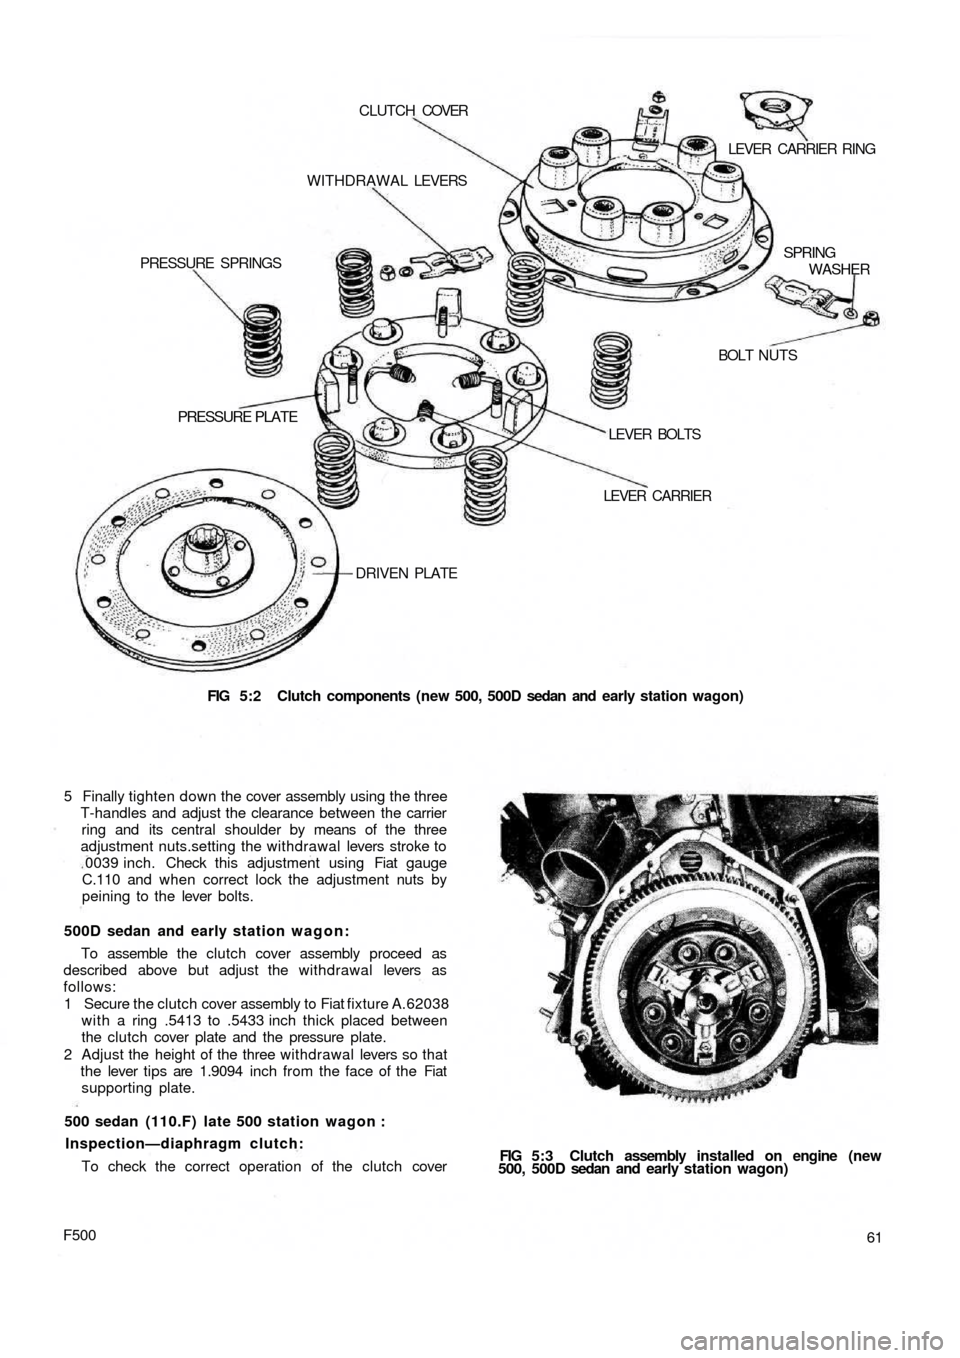 FIAT 500 1957 1.G Repair Manual FIG 5:2  Clutch components (new 500, 500D sedan  and  early station wagon) DRIVEN PLATE
PRESSURE  PLATE
LEVER  CARRIER LEVER  BOLTSBOLT NUTS PRESSURE  SPRINGSWITHDRAWAL LEVERS CLUTCH COVER
LEVER  CARR